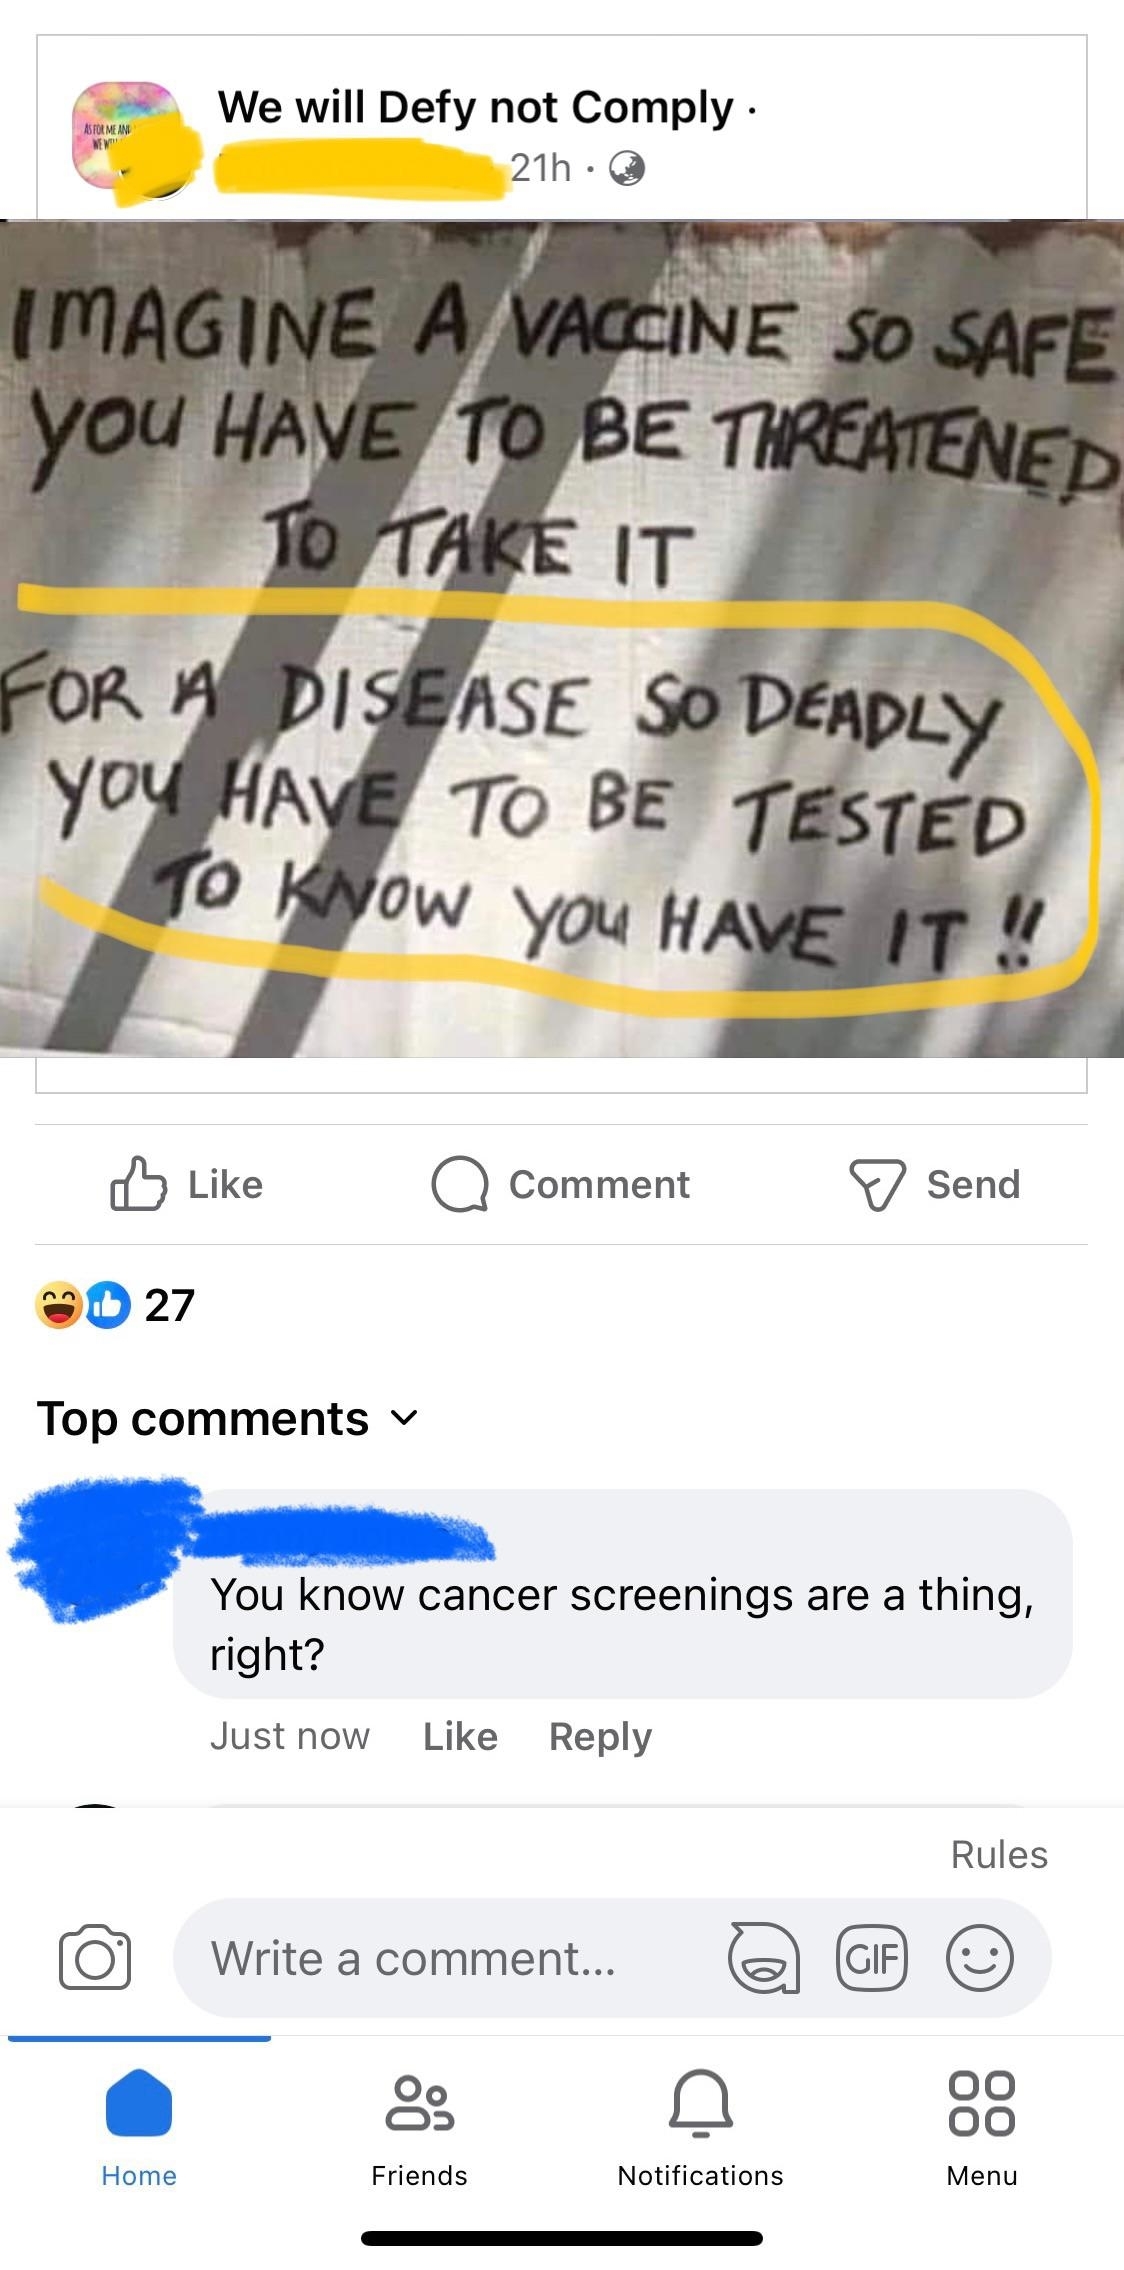 &quot;You know cancer screenings are a thing, right?&quot;